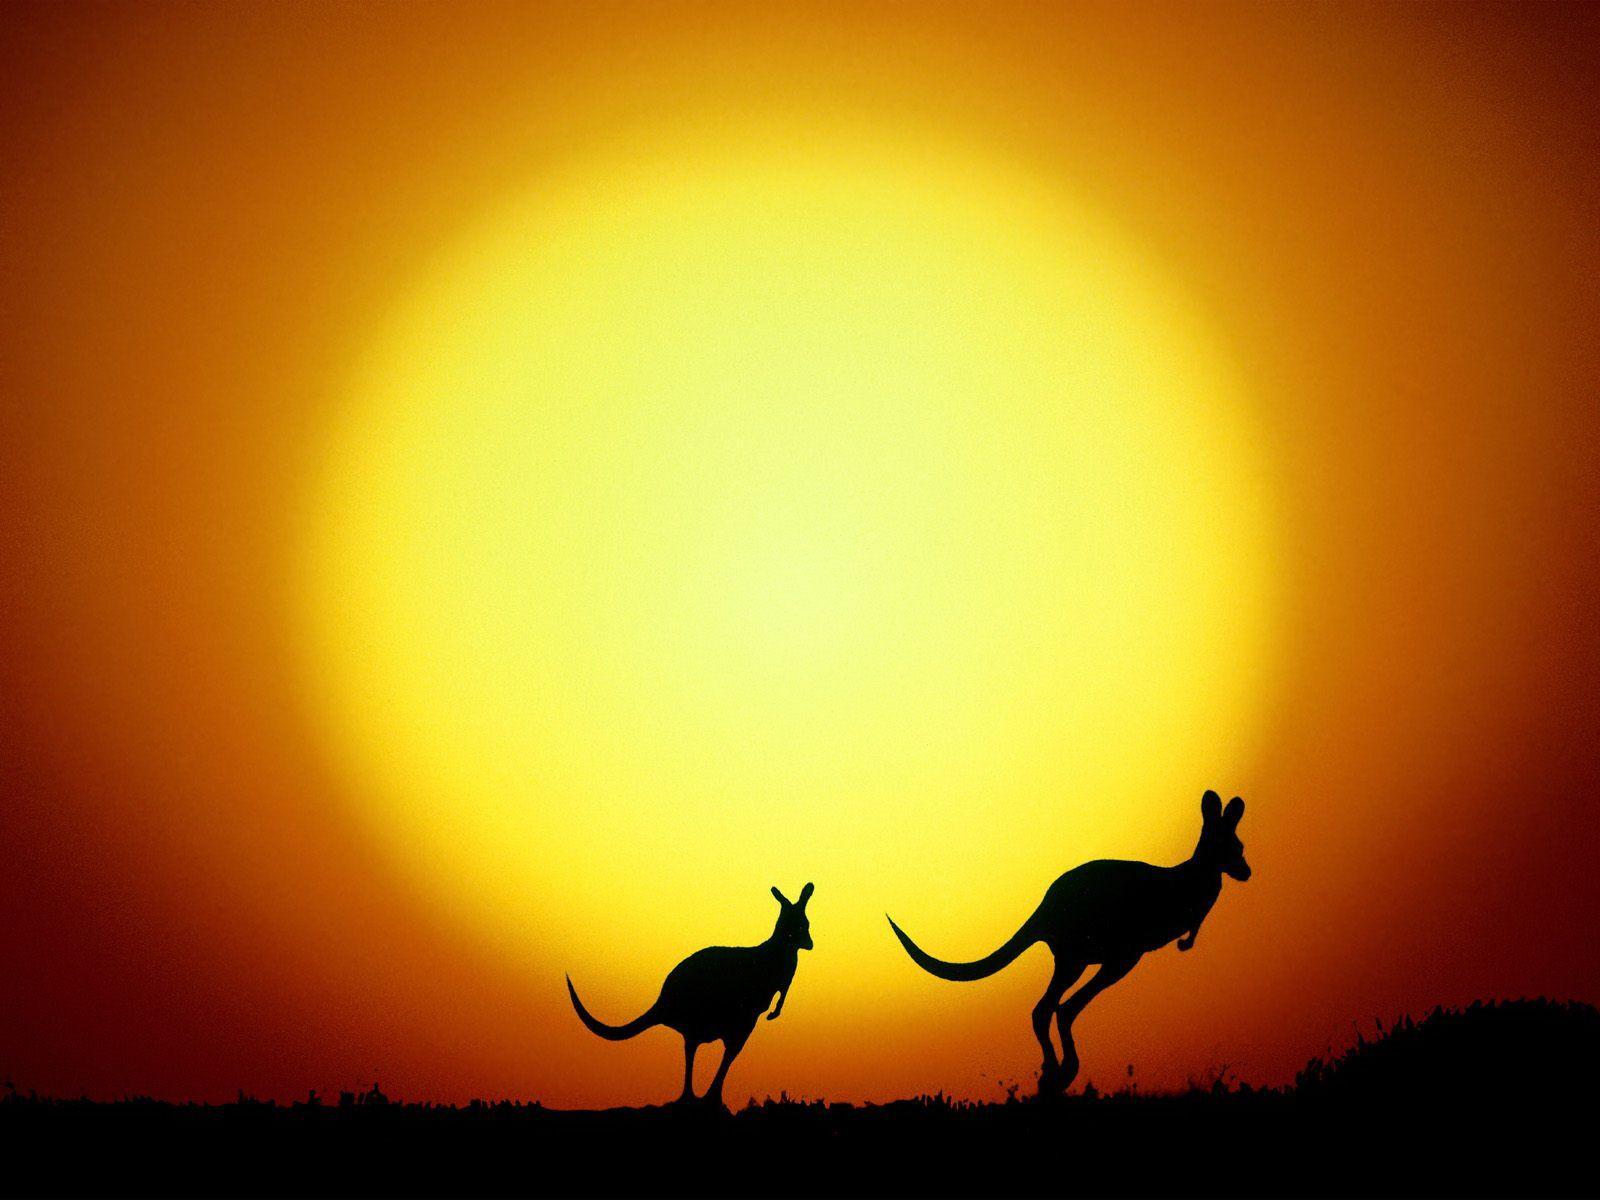 Kangaroos against the sun wallpaper and image